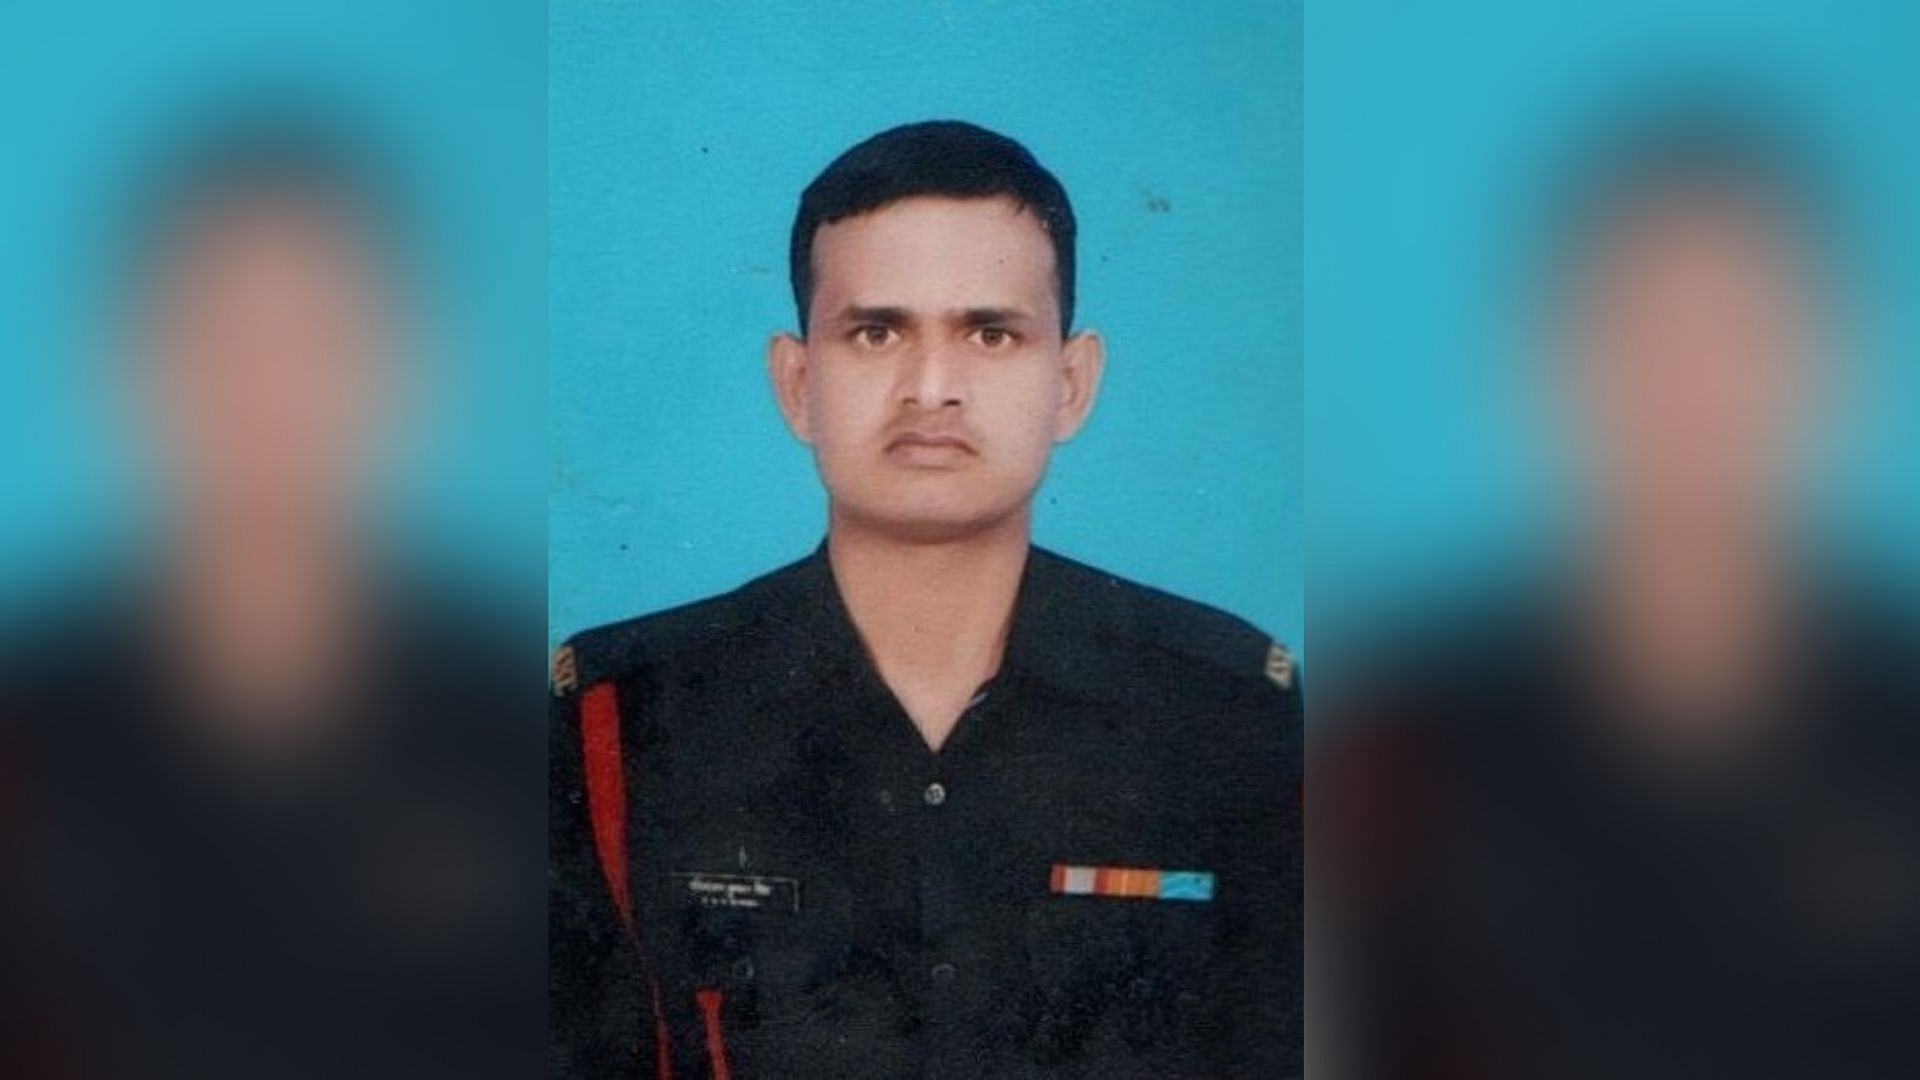 An Army jawan was killed as Pakistani troops targeted forward posts and villages along the Line of Control (LoC).